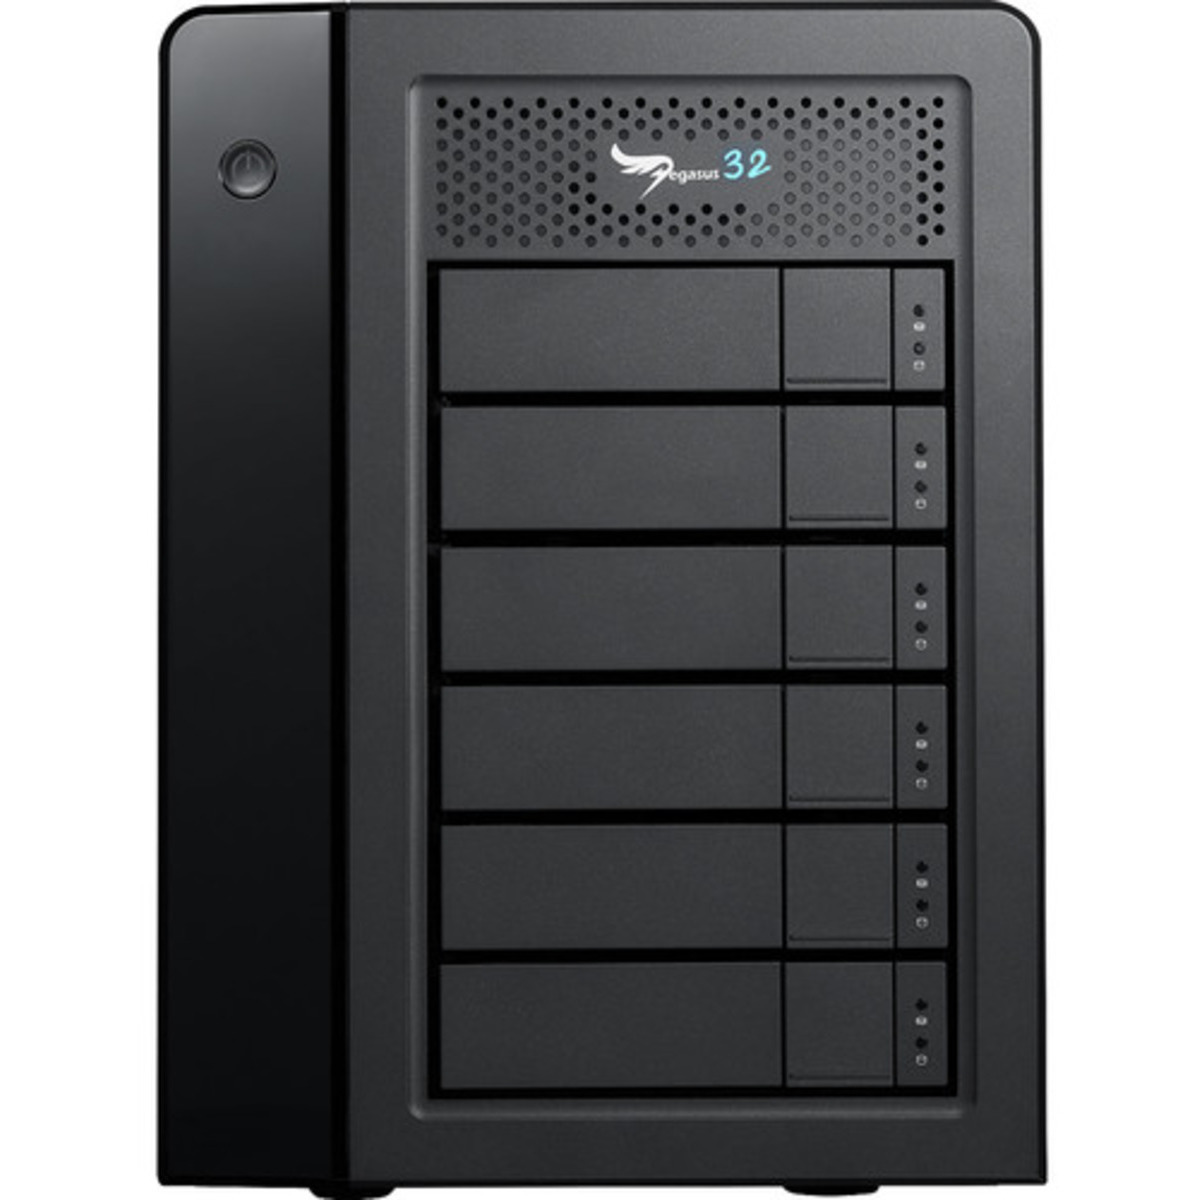 Promise Technology Pegasus32 R6 Thunderbolt 3 16tb 6-Bay Desktop Multimedia / Power User / Business DAS - Direct Attached Storage Device 4x4tb Sandisk Ultra 3D SDSSDH3-4T00 2.5 560/520MB/s SATA 6Gb/s SSD CONSUMER Class Drives Installed - Burn-In Tested Pegasus32 R6 Thunderbolt 3